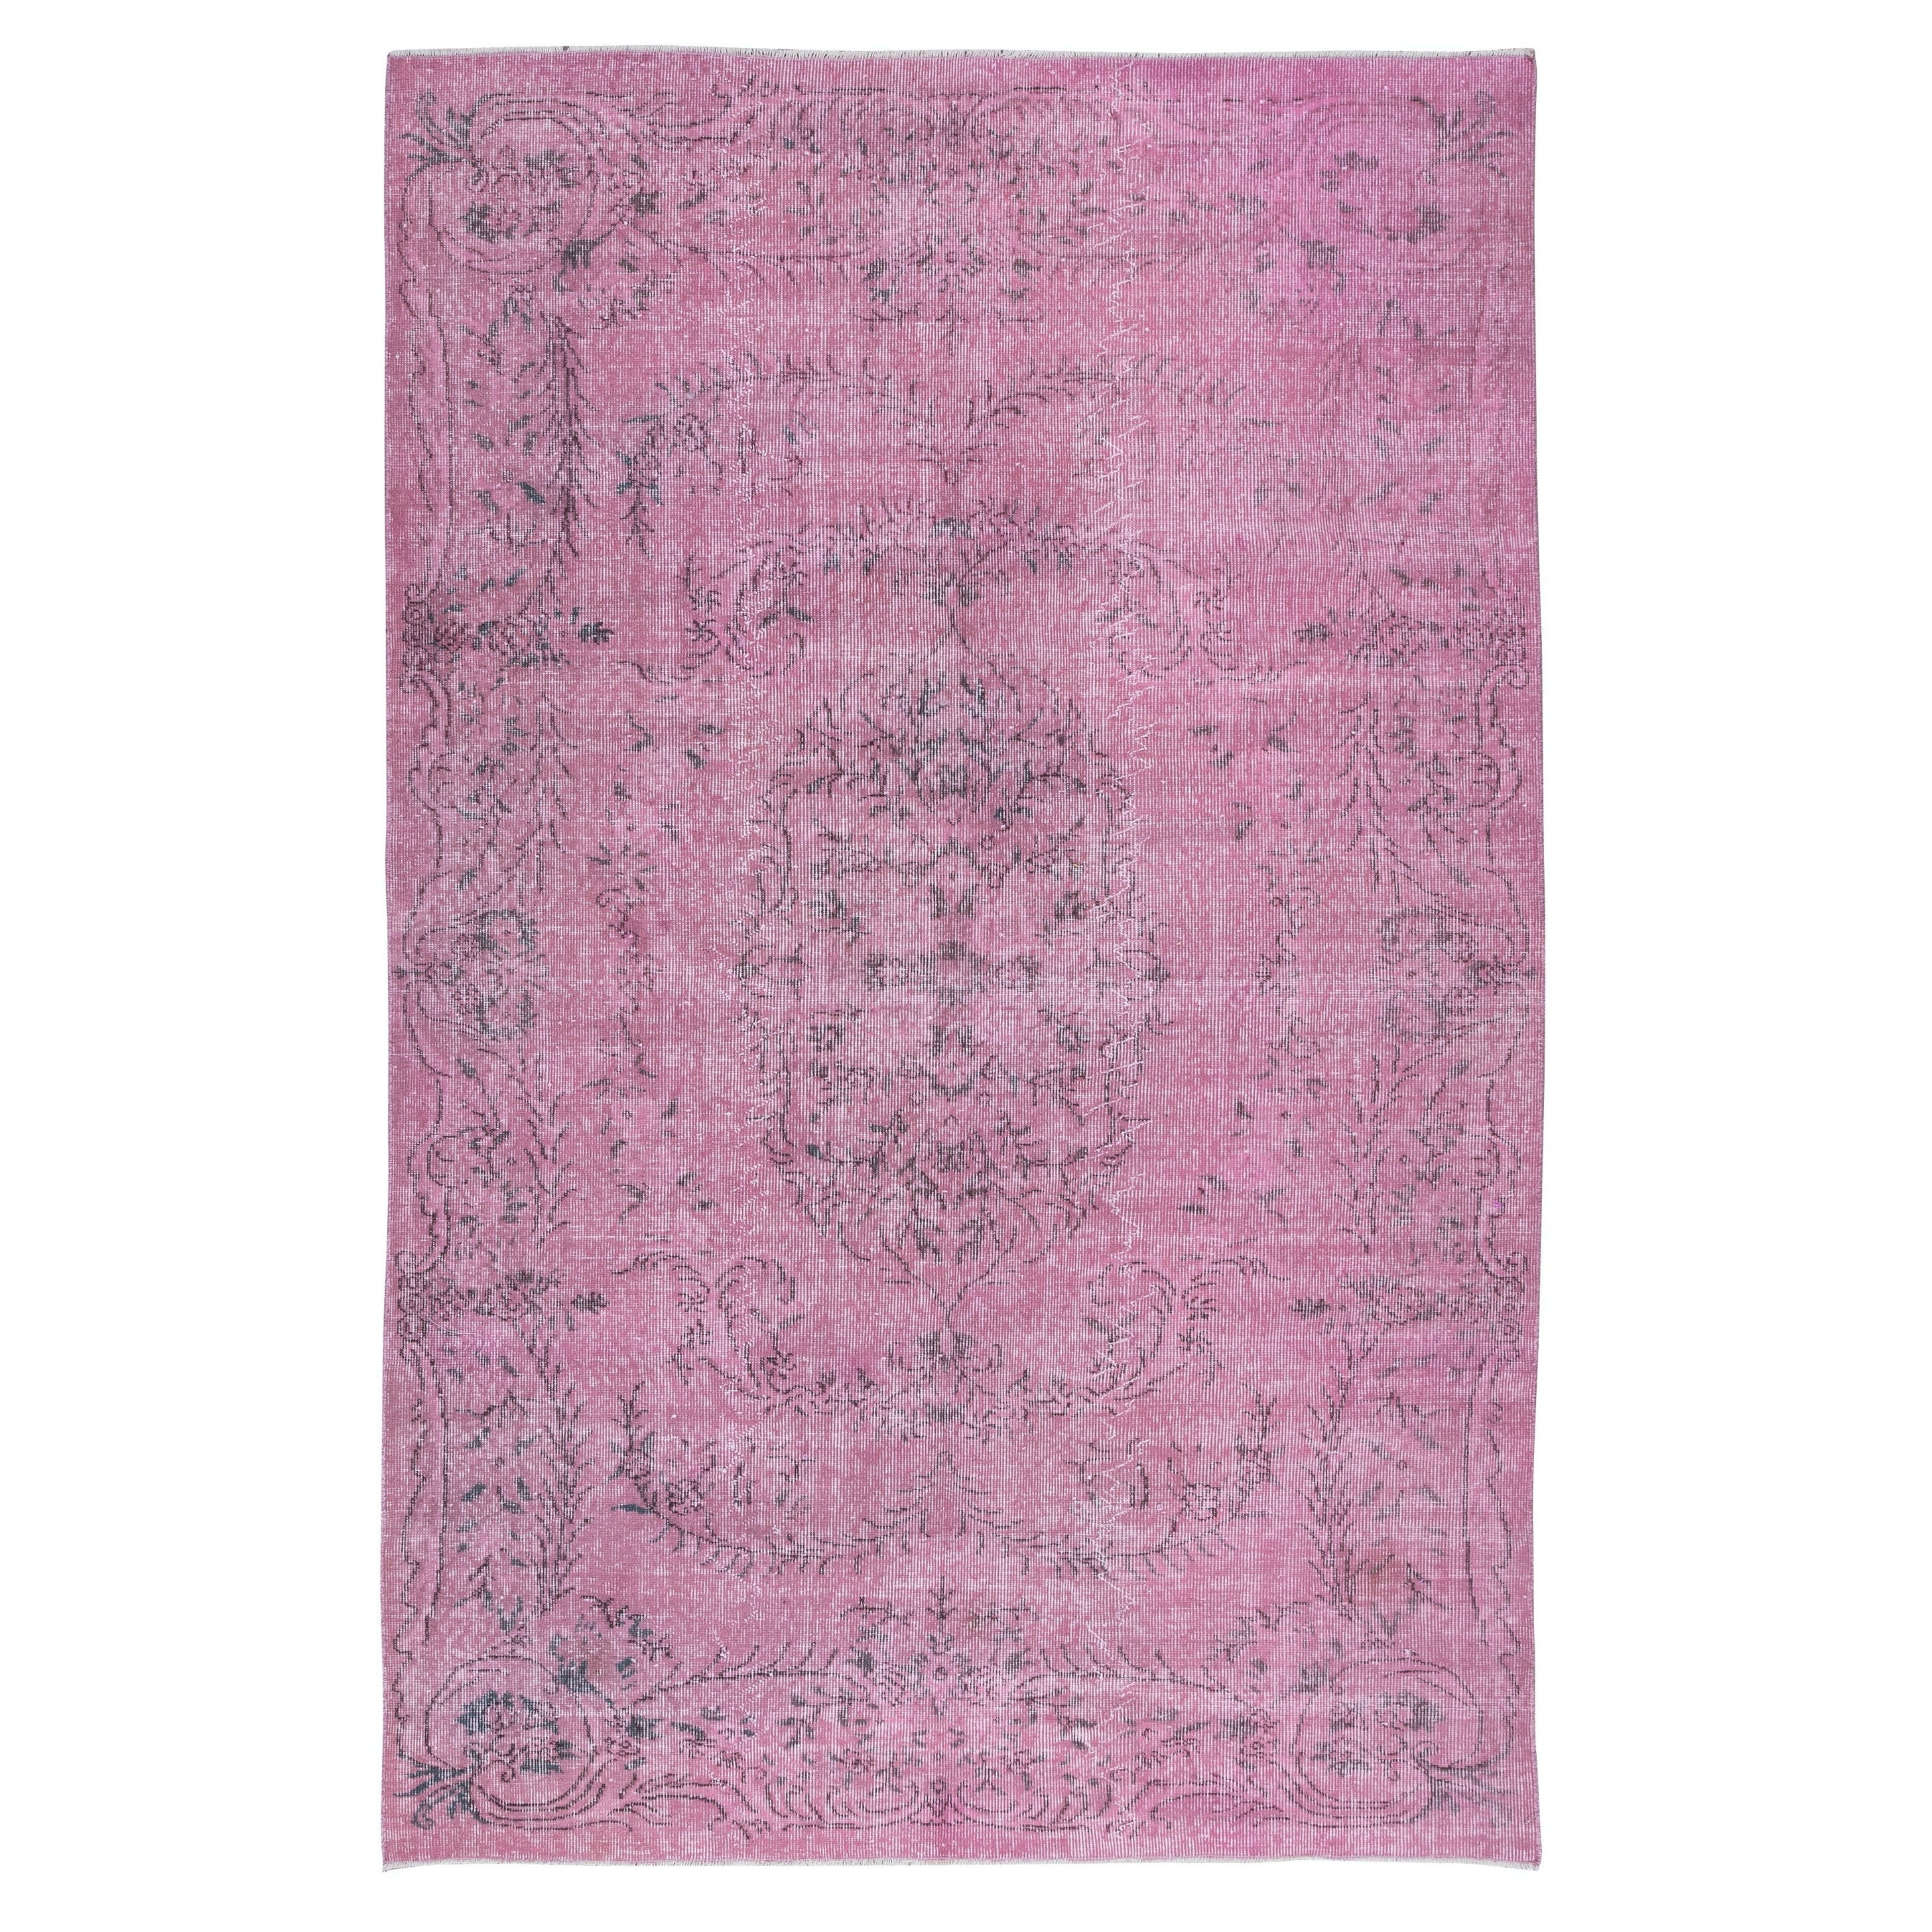 5.8x9.2 Ft Light Pink Wool Area Rug for Modern Interiors, Handmade in Turkey For Sale